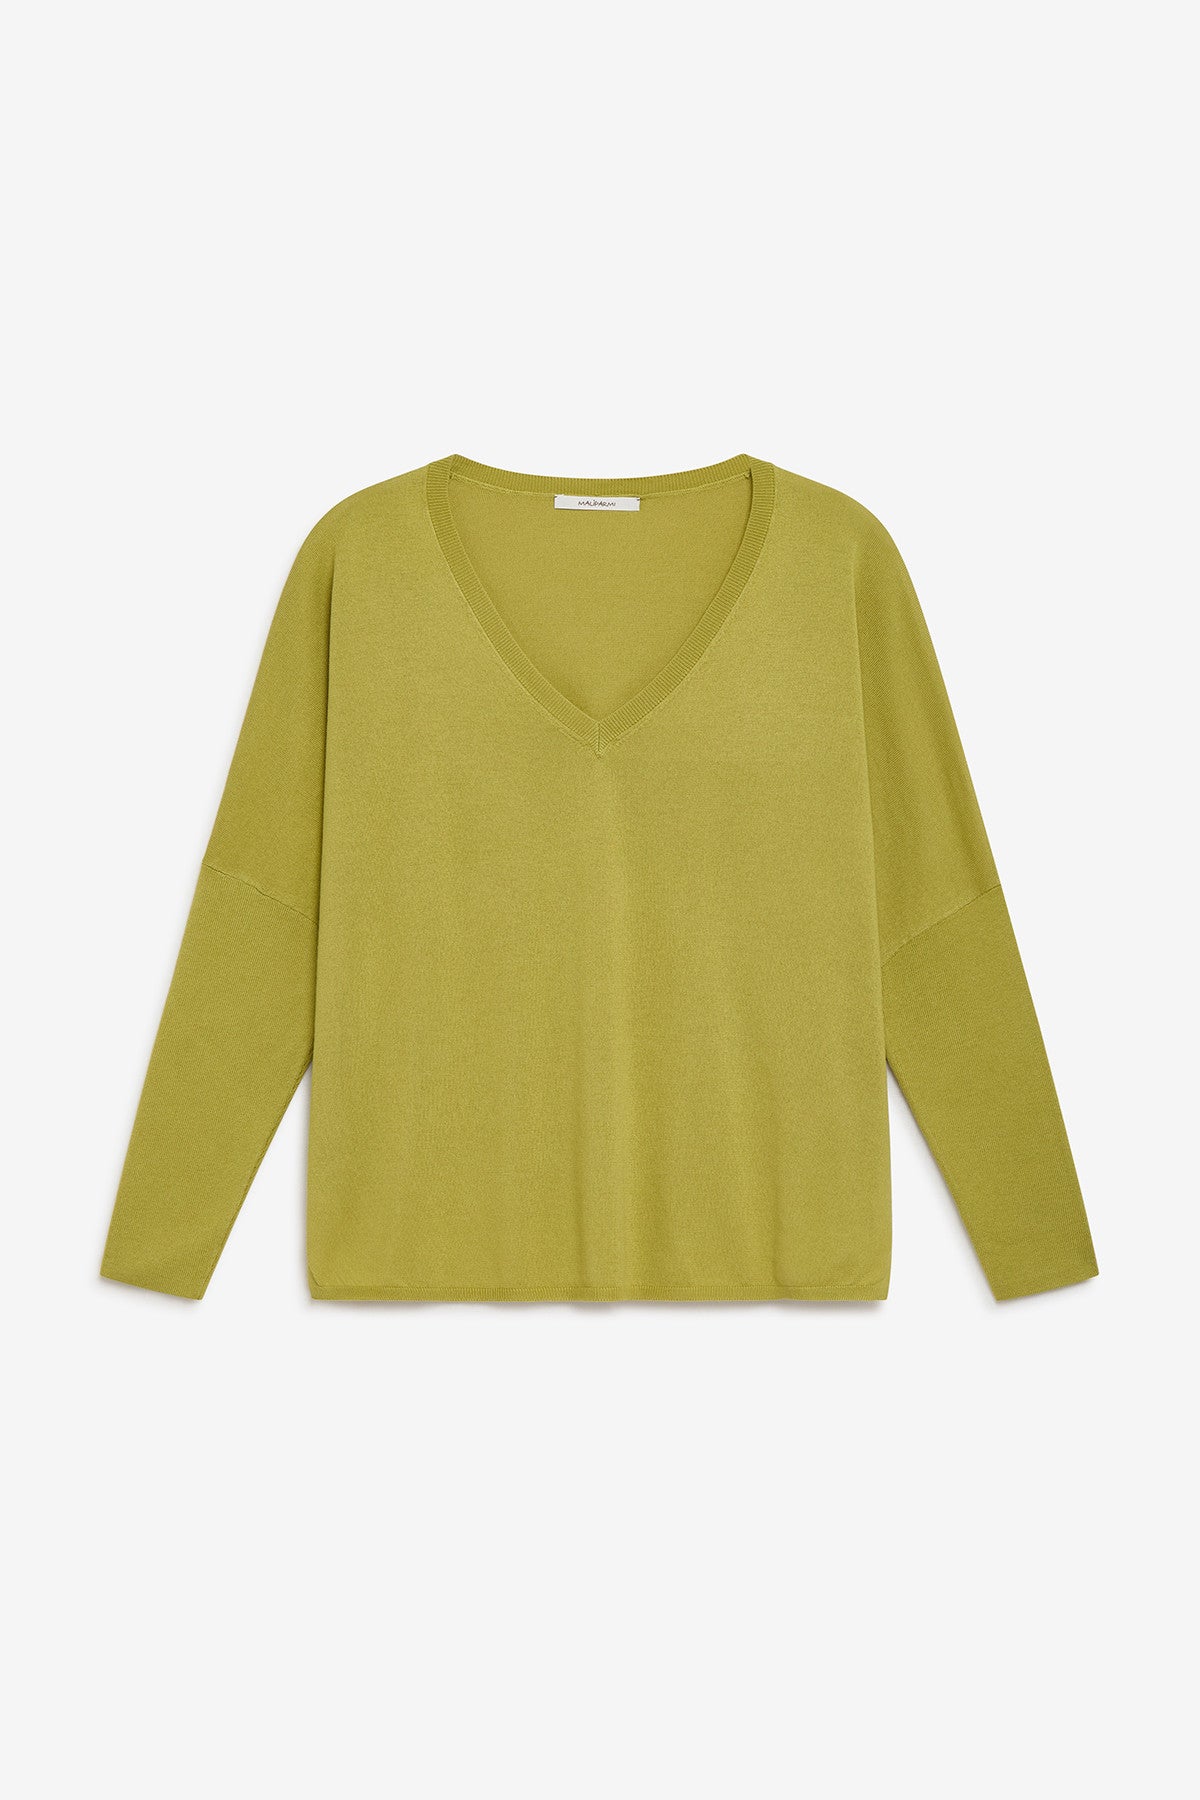 green smooth spring sweater